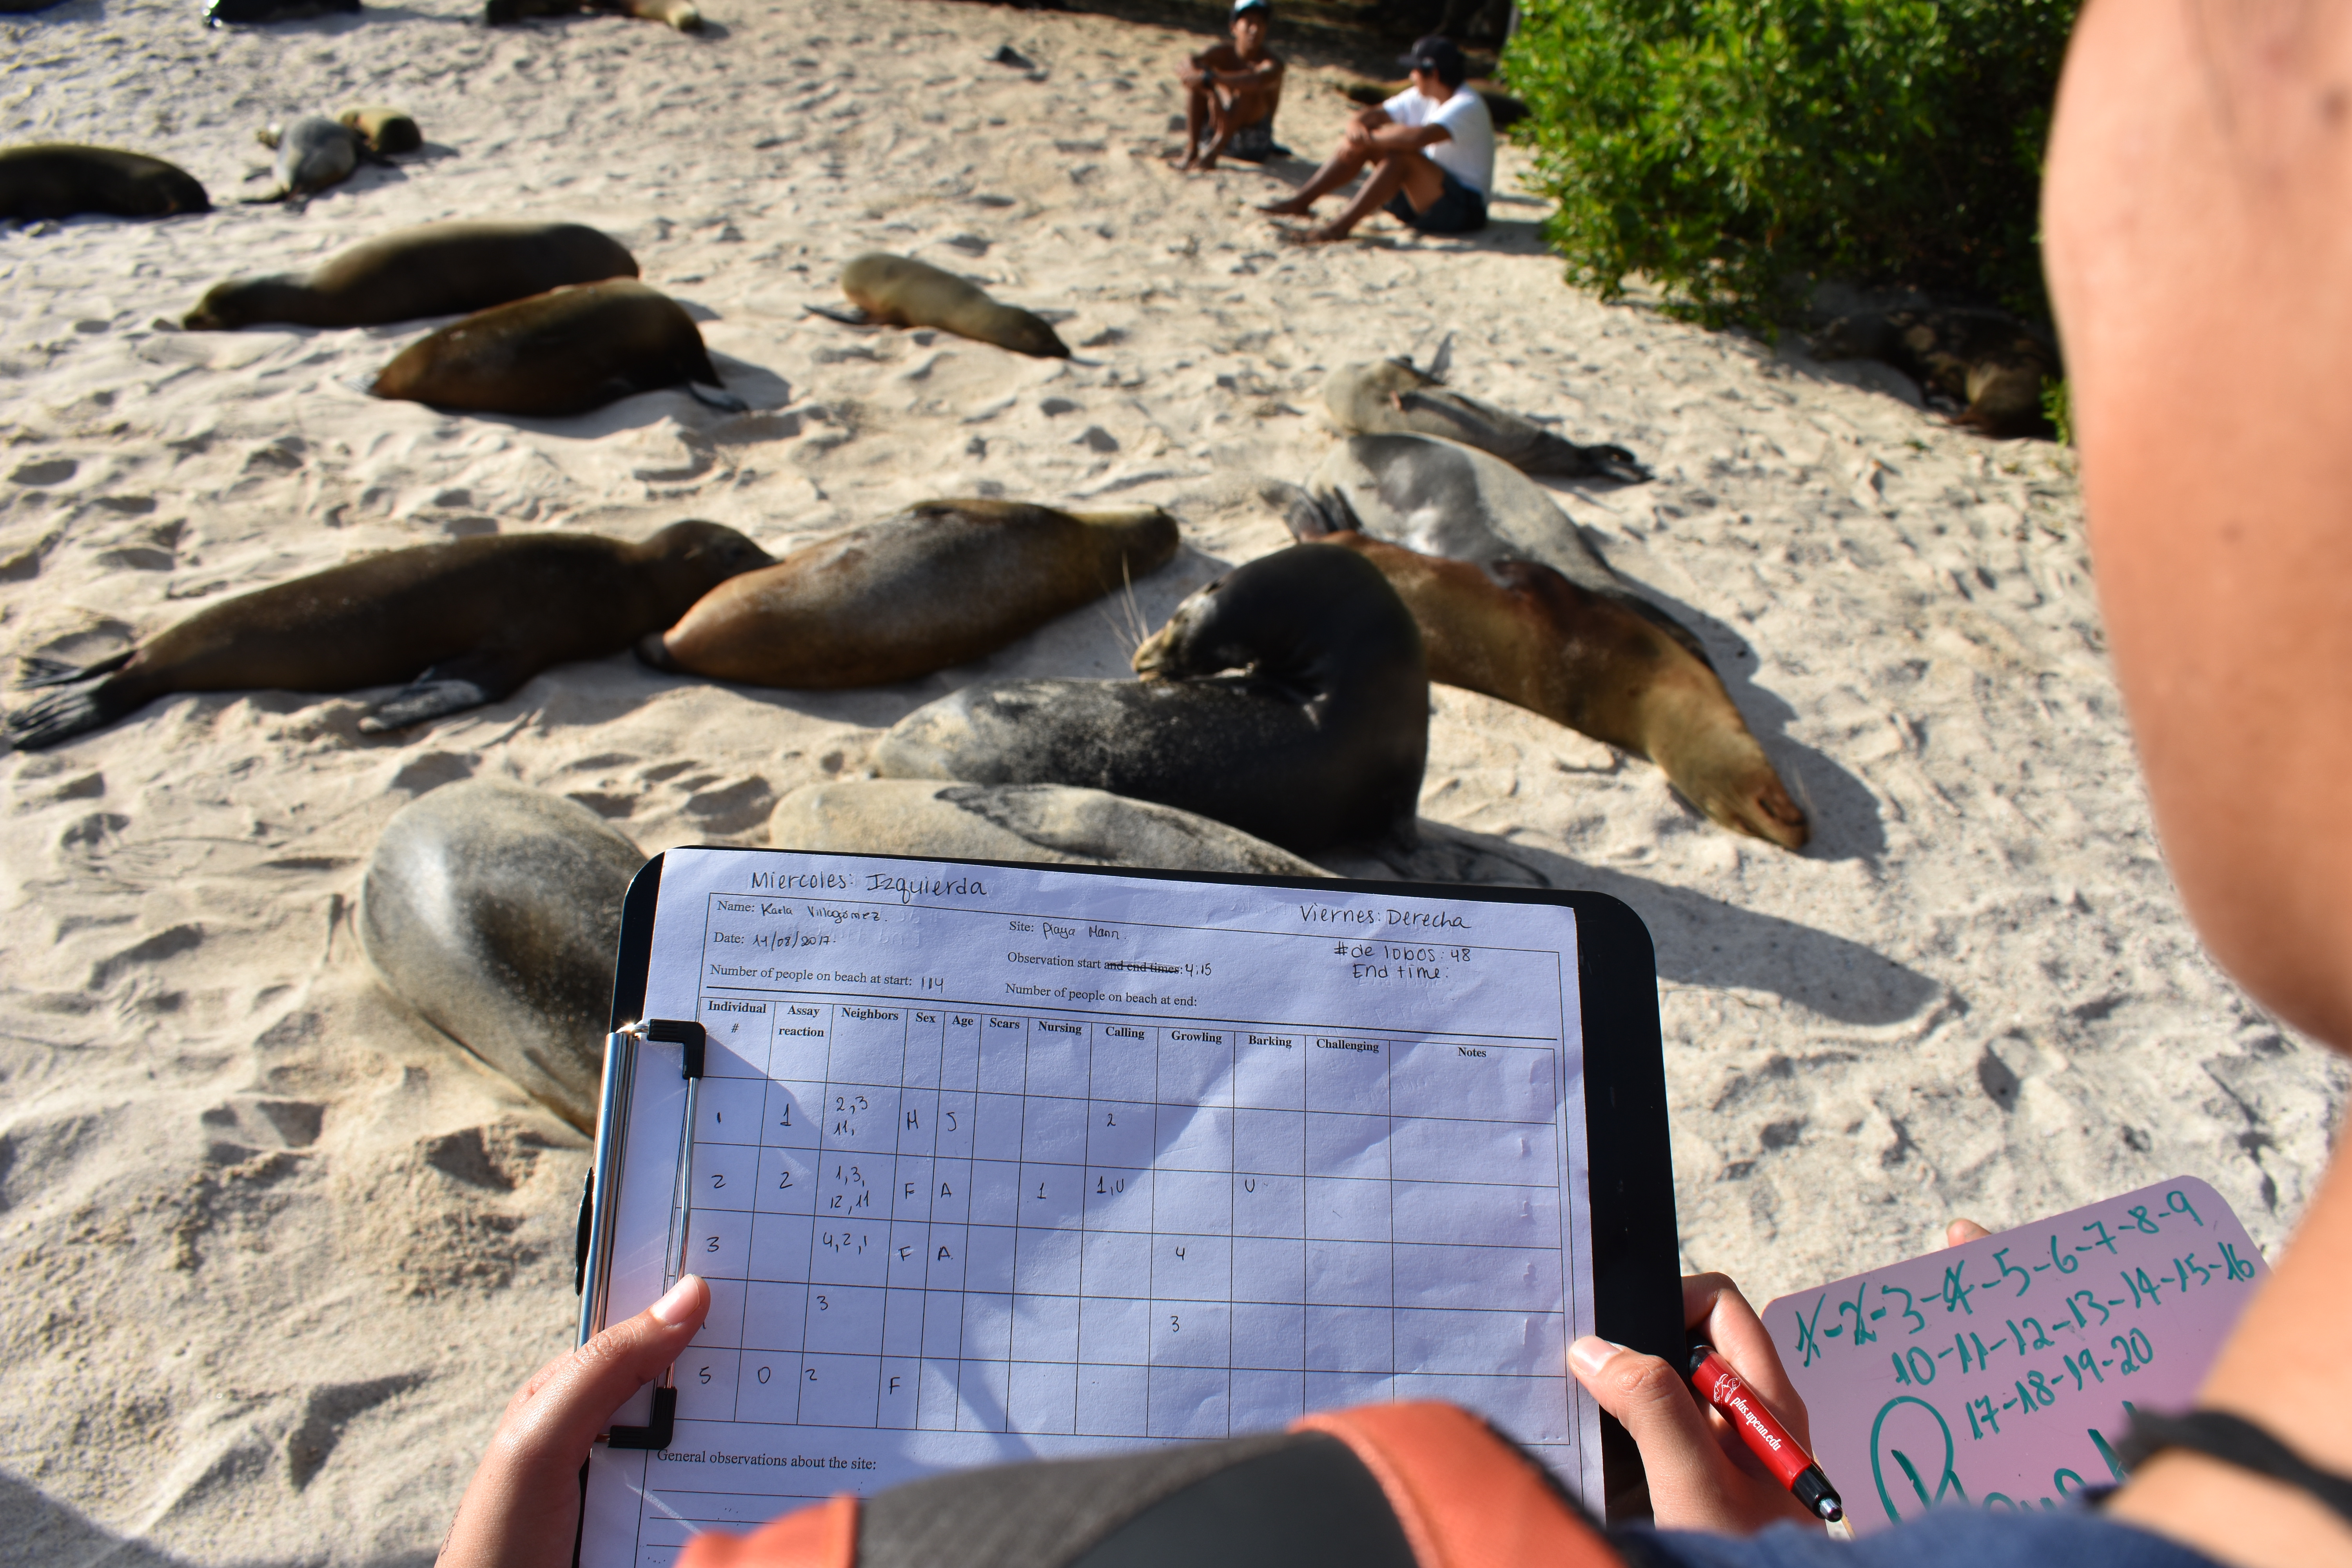 The Complicated Relationship Between Humans and Endangered Sea Lions in the Galápagos